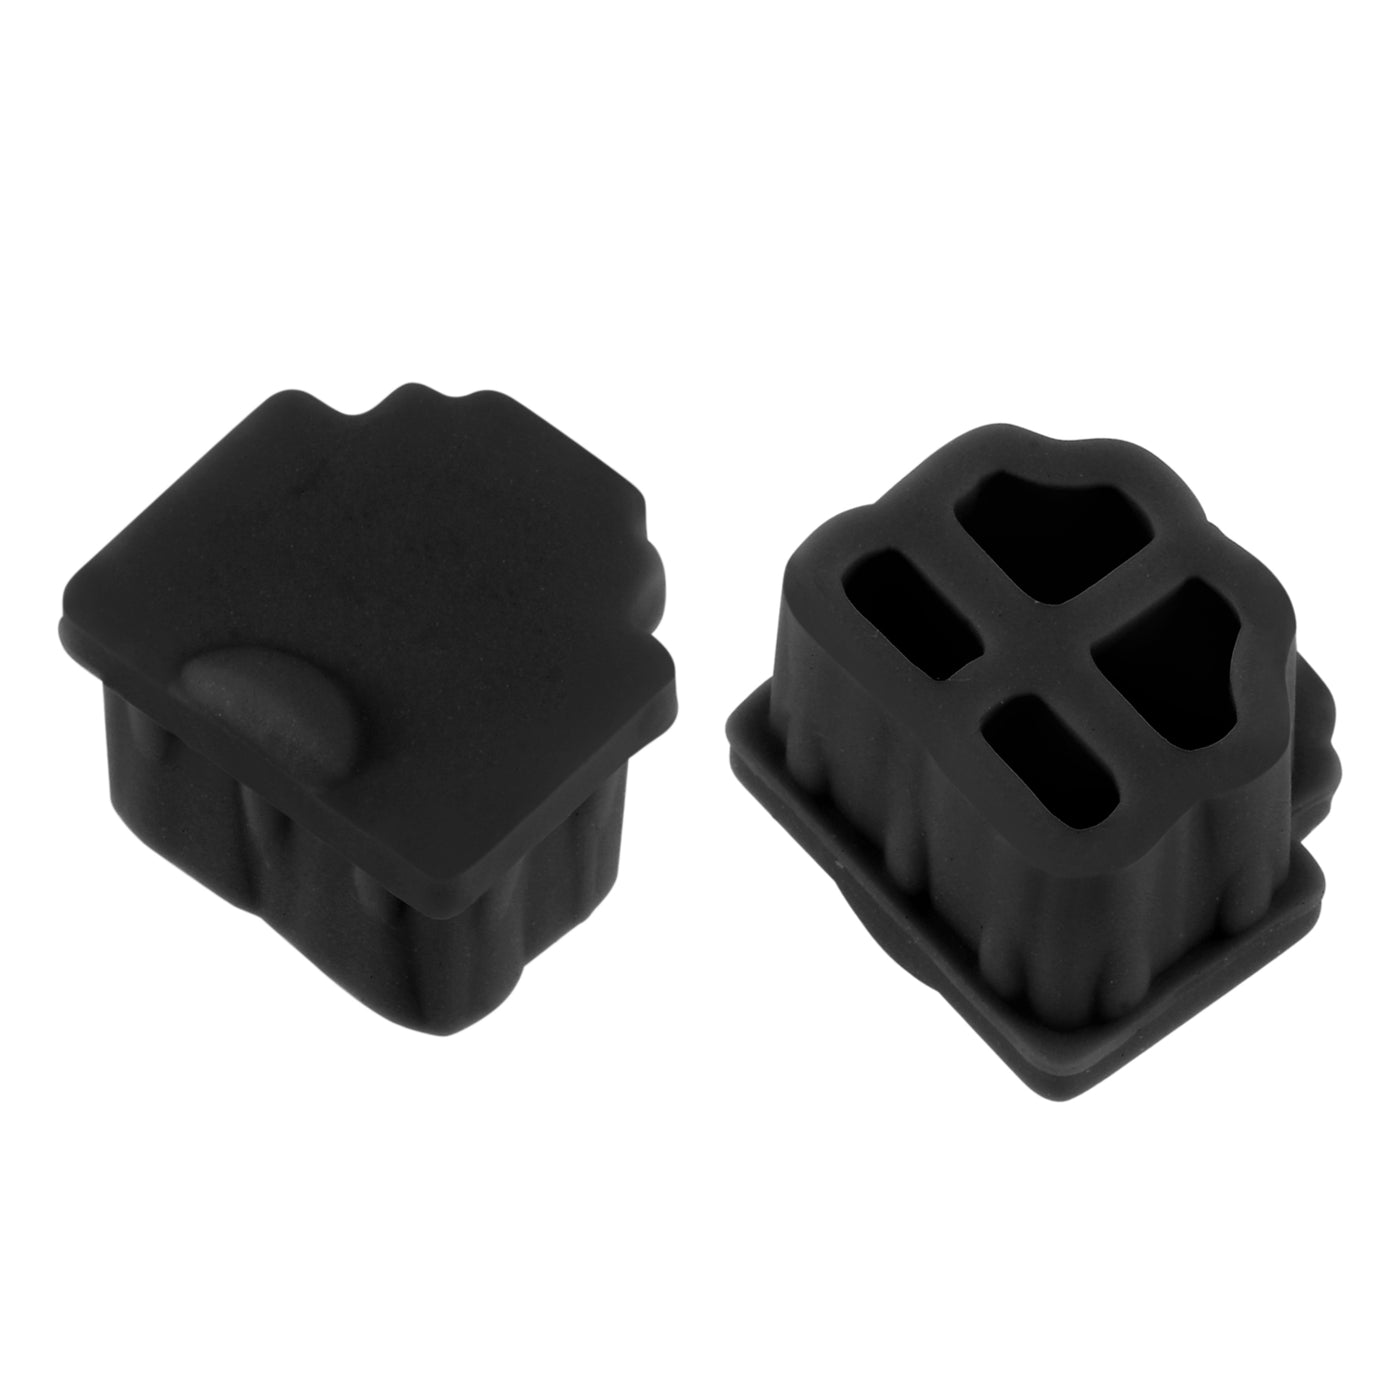 uxcell Uxcell 30pcs RJ11 Silicone Protector Telephone Modular Port Anti Dust Cap Cover 9.5mmx7.5mm Black